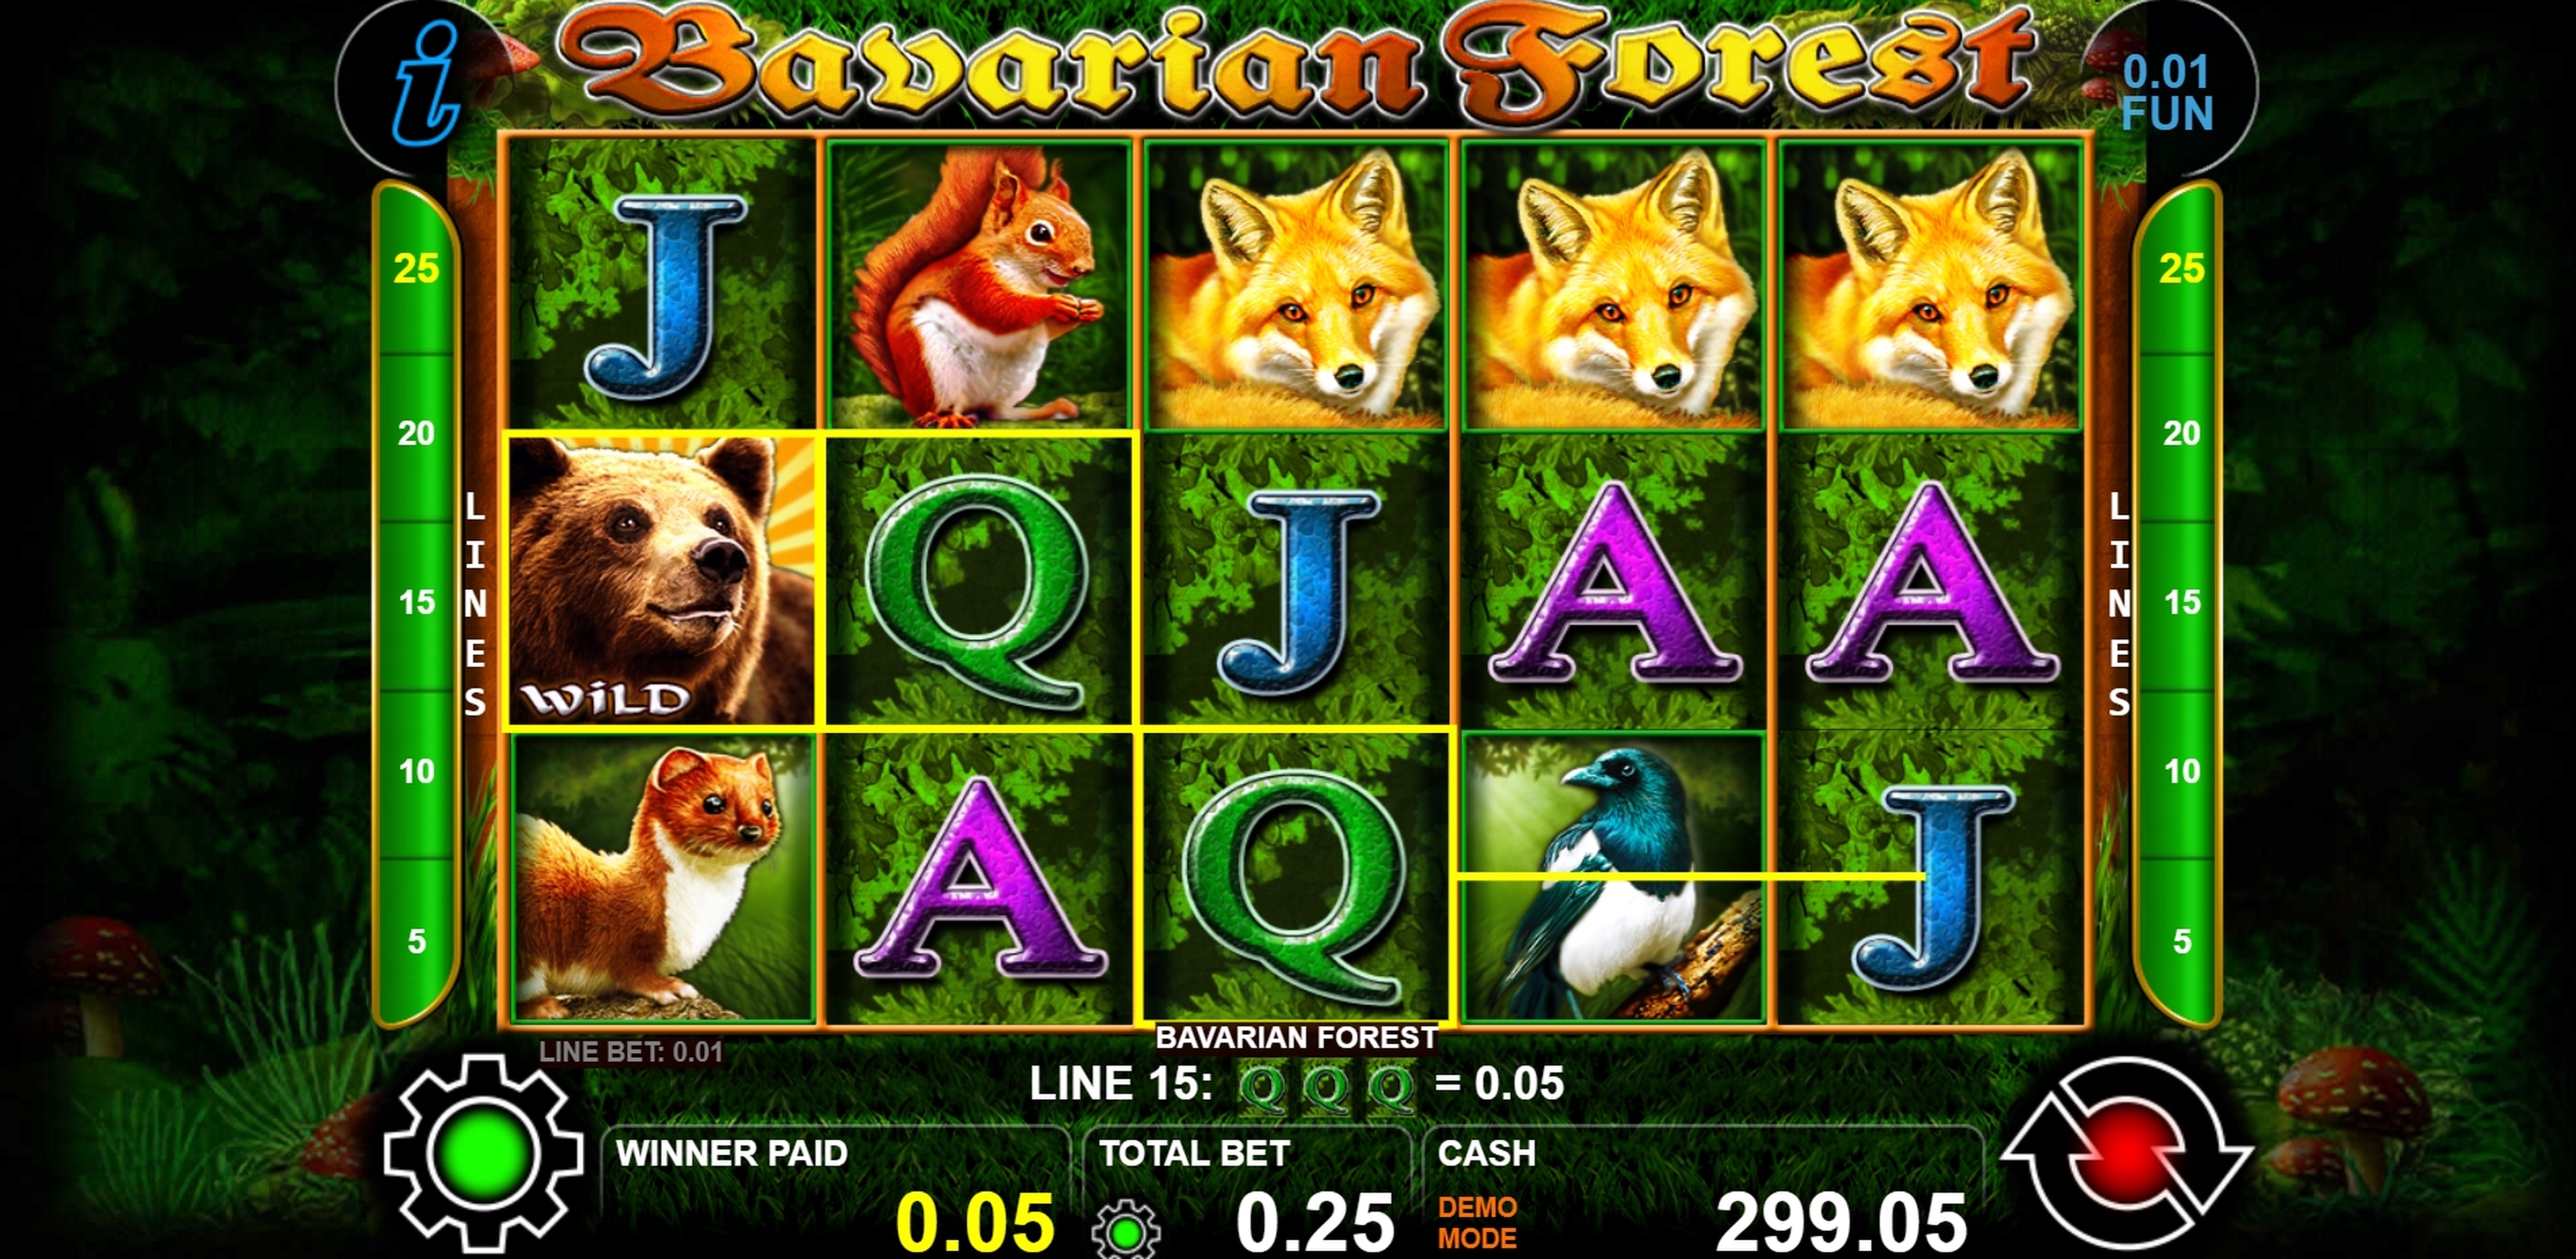 Win Money in Bavarian Forest Free Slot Game by casino technology